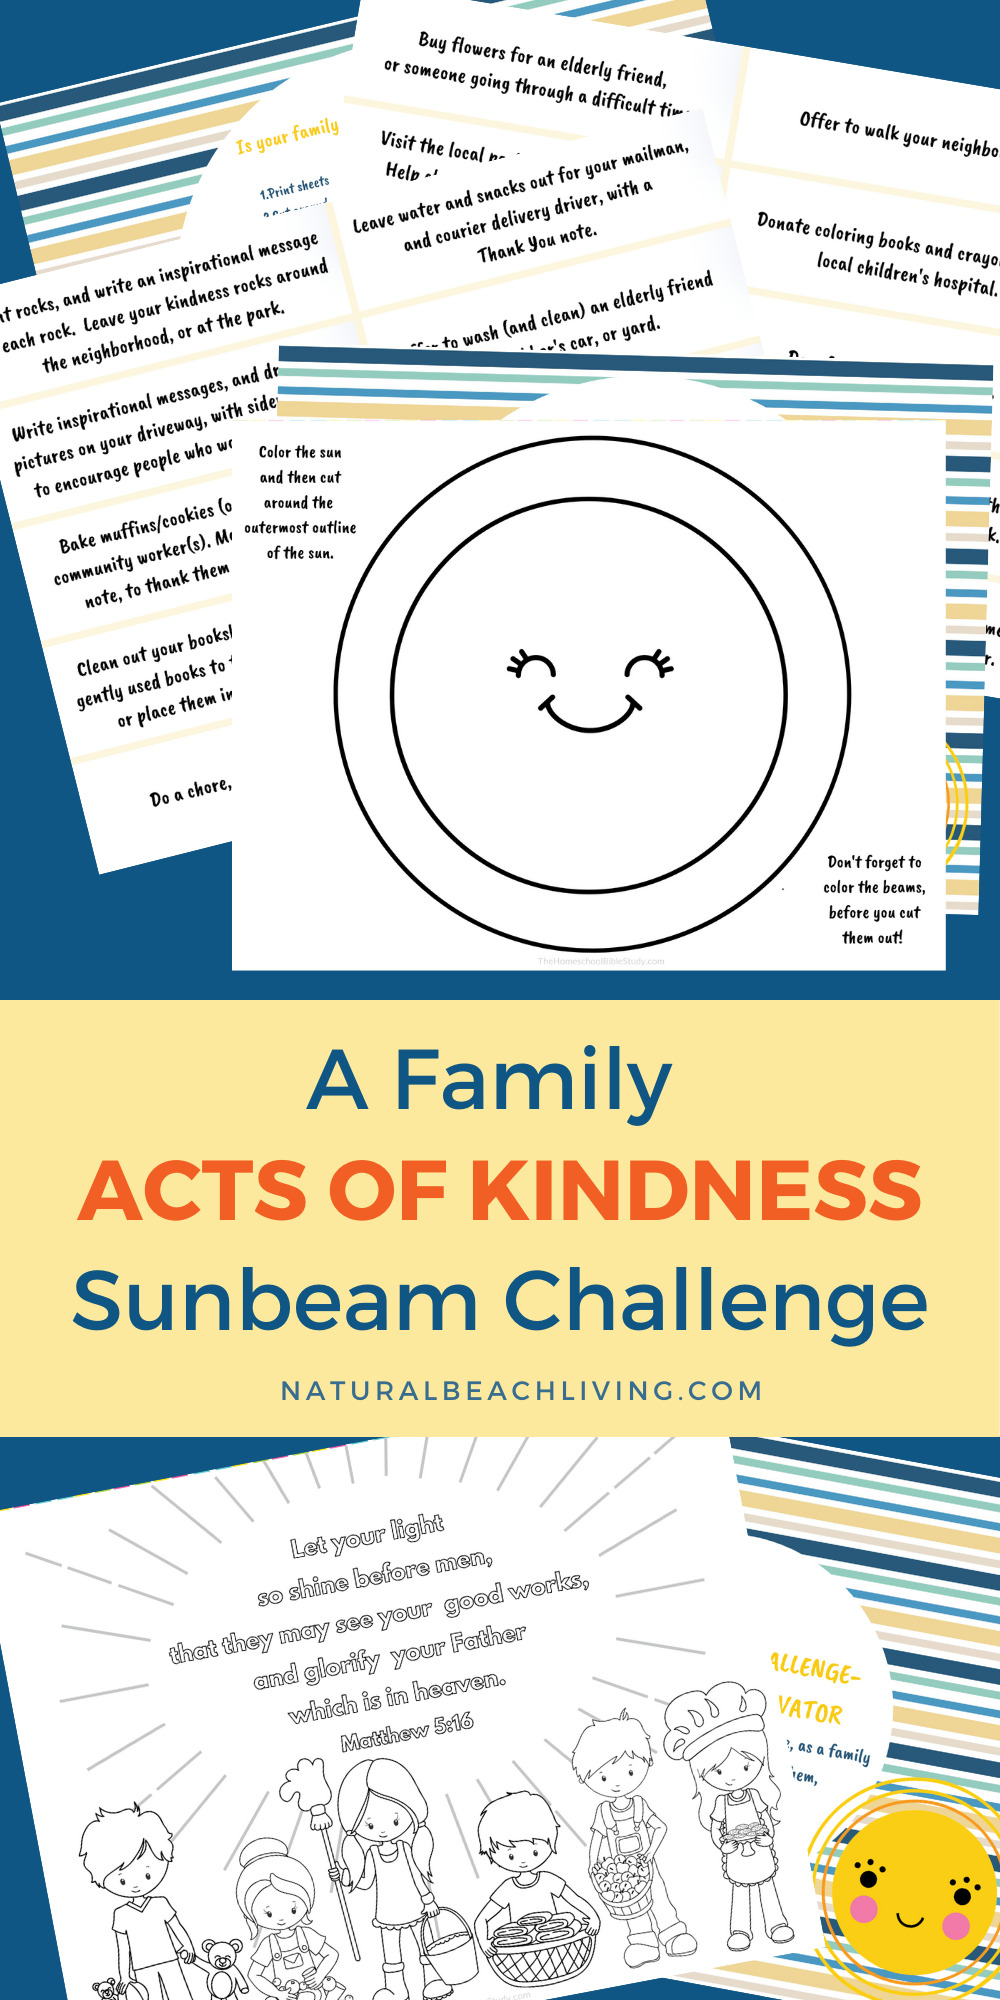 The Best Random Acts of Kindness Ideas, you'll find over 200 Acts of Kindness Ideas That Will Inspire You, Kindness printables, Simple Acts of Kindness, Kindness ideas for Kids, Ideas for Random Acts of Kindness, Plus, over 100 Examples of Random Acts of Kindness, Kindness Ideas